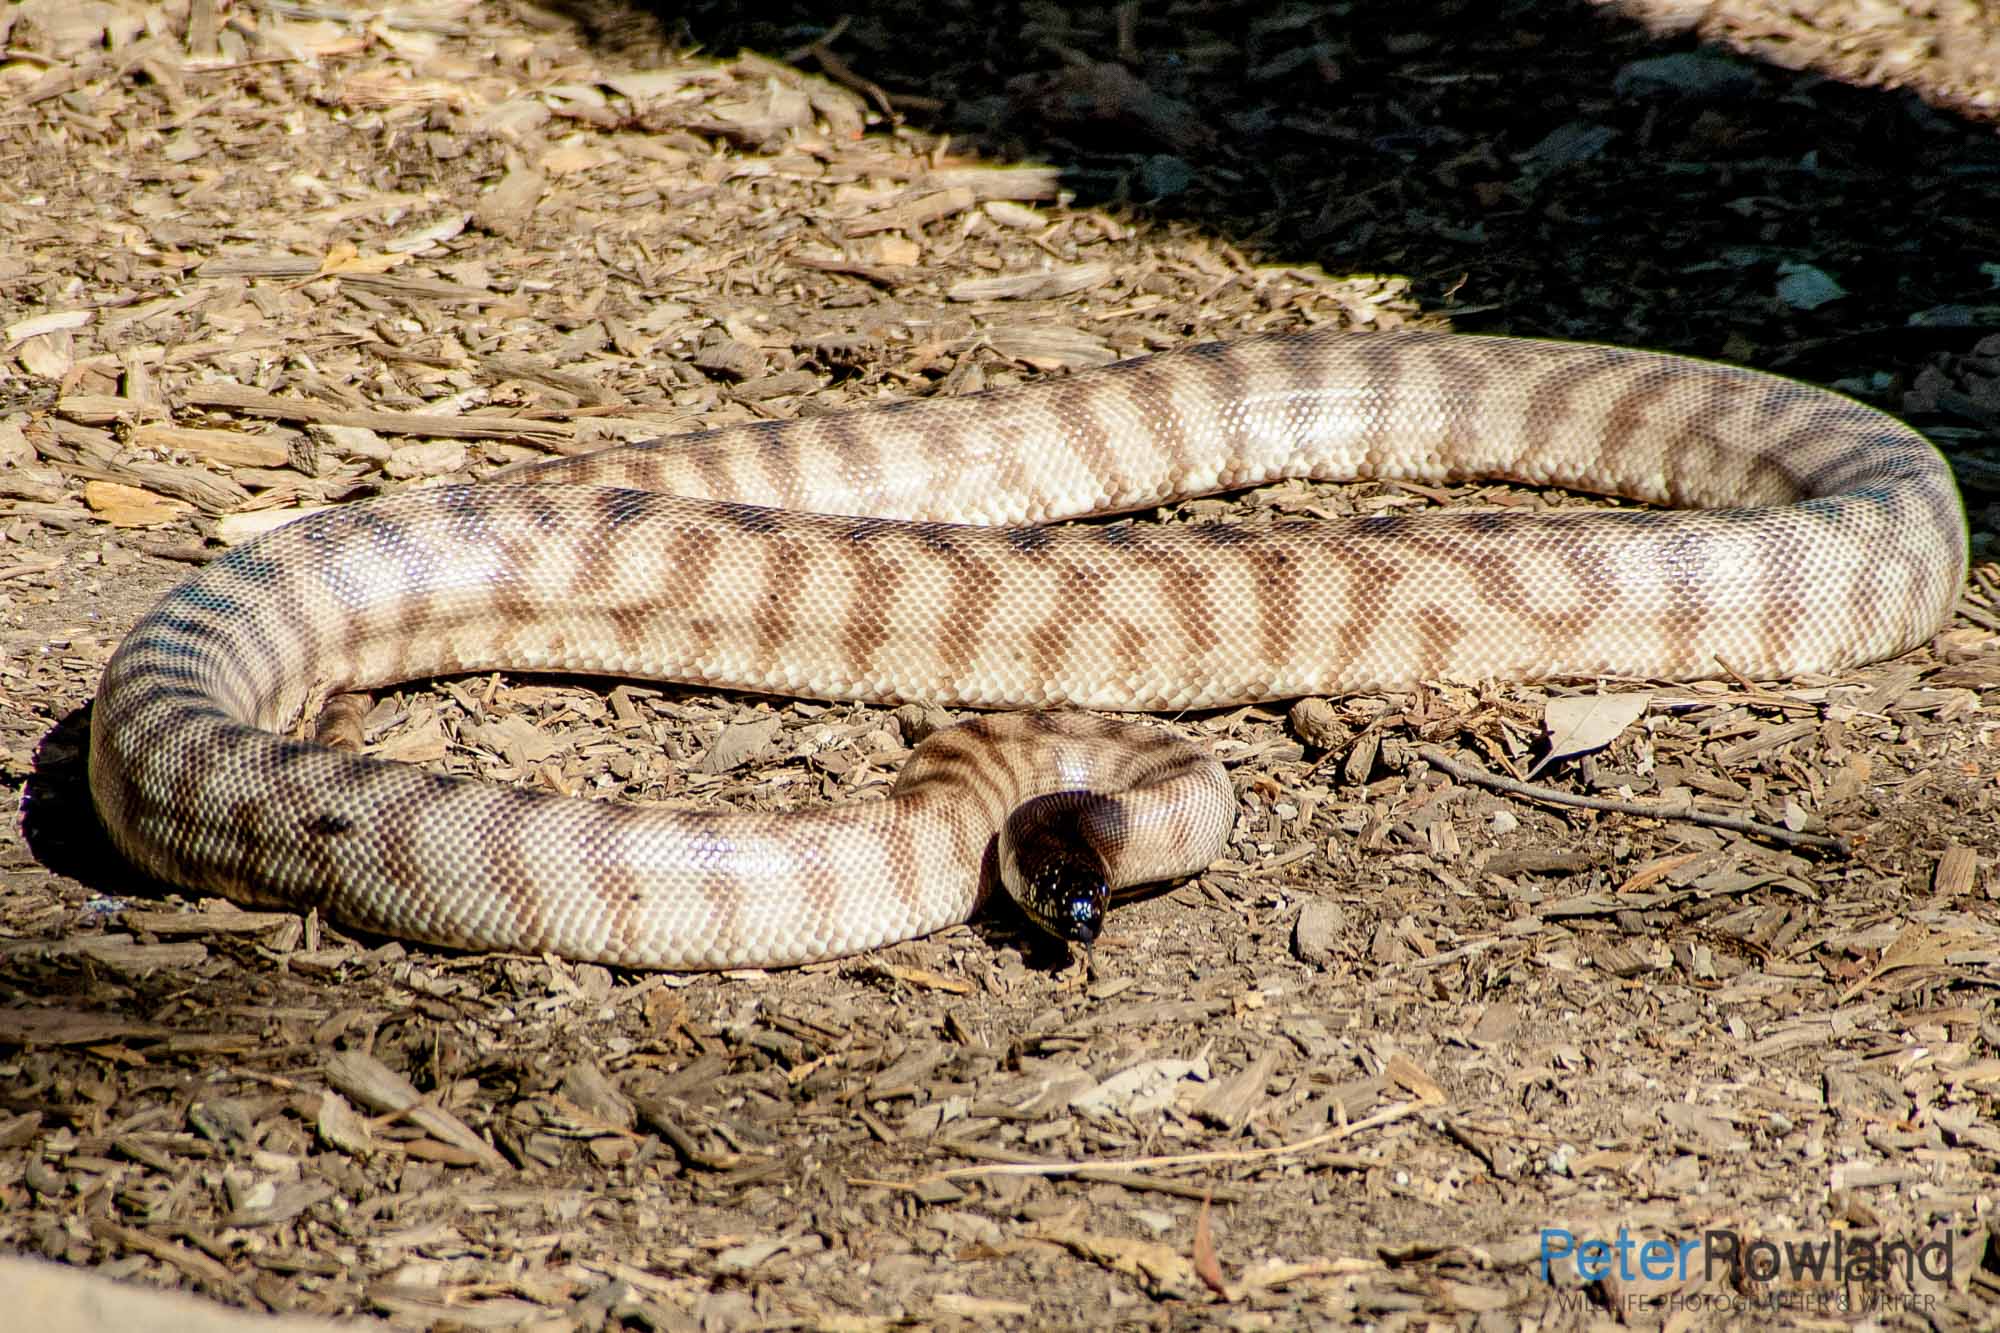 A Black-headed Python coiled on the ground